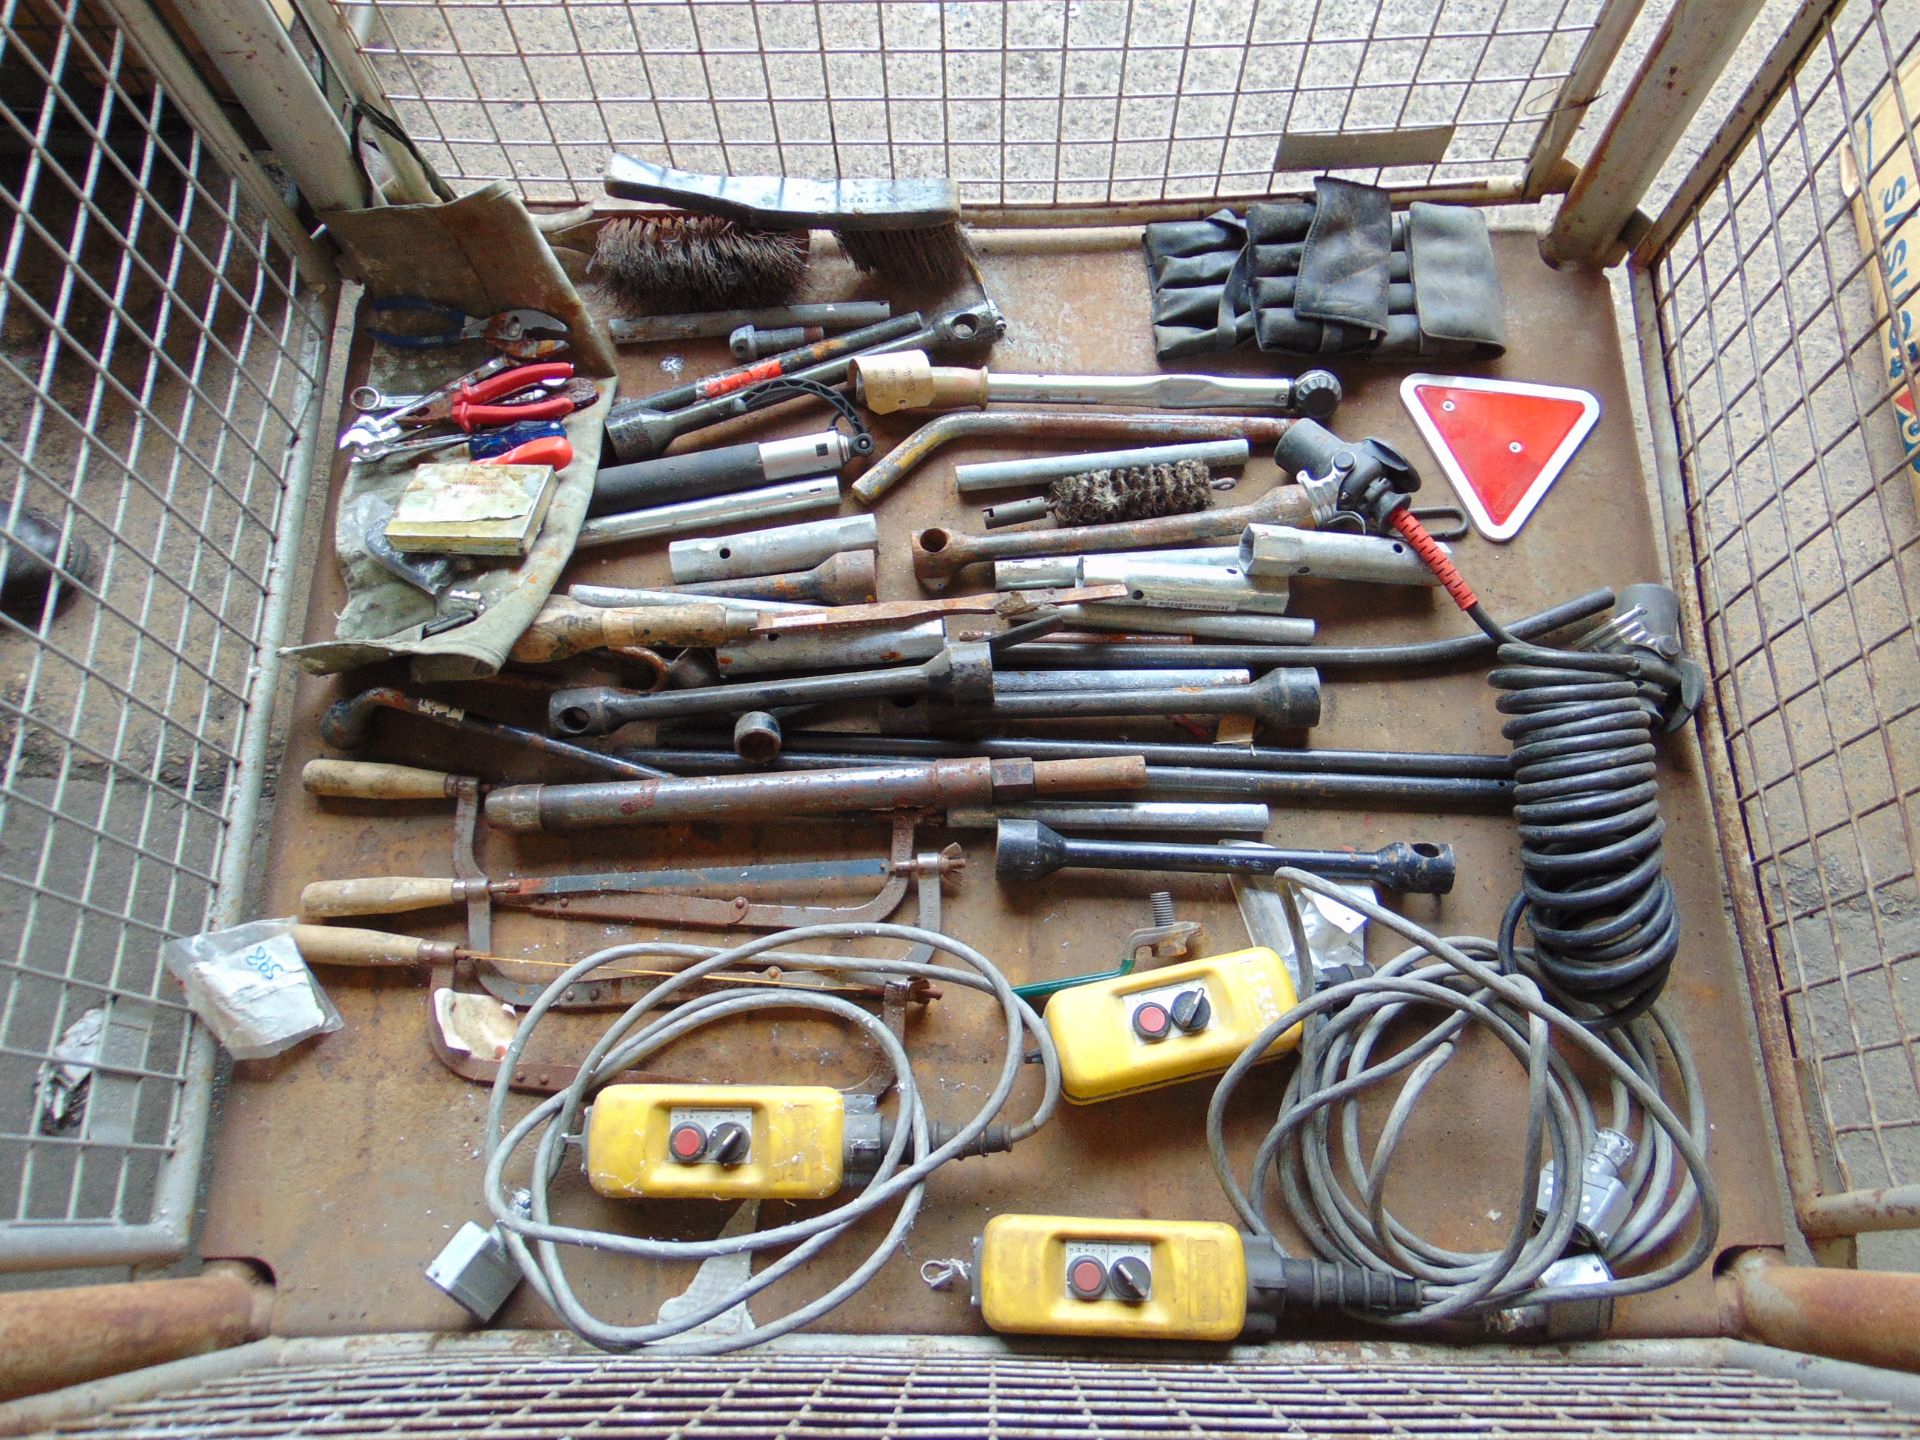 Stillage of Tools, Remote Controls, Trailer Electrical Connectors Eect